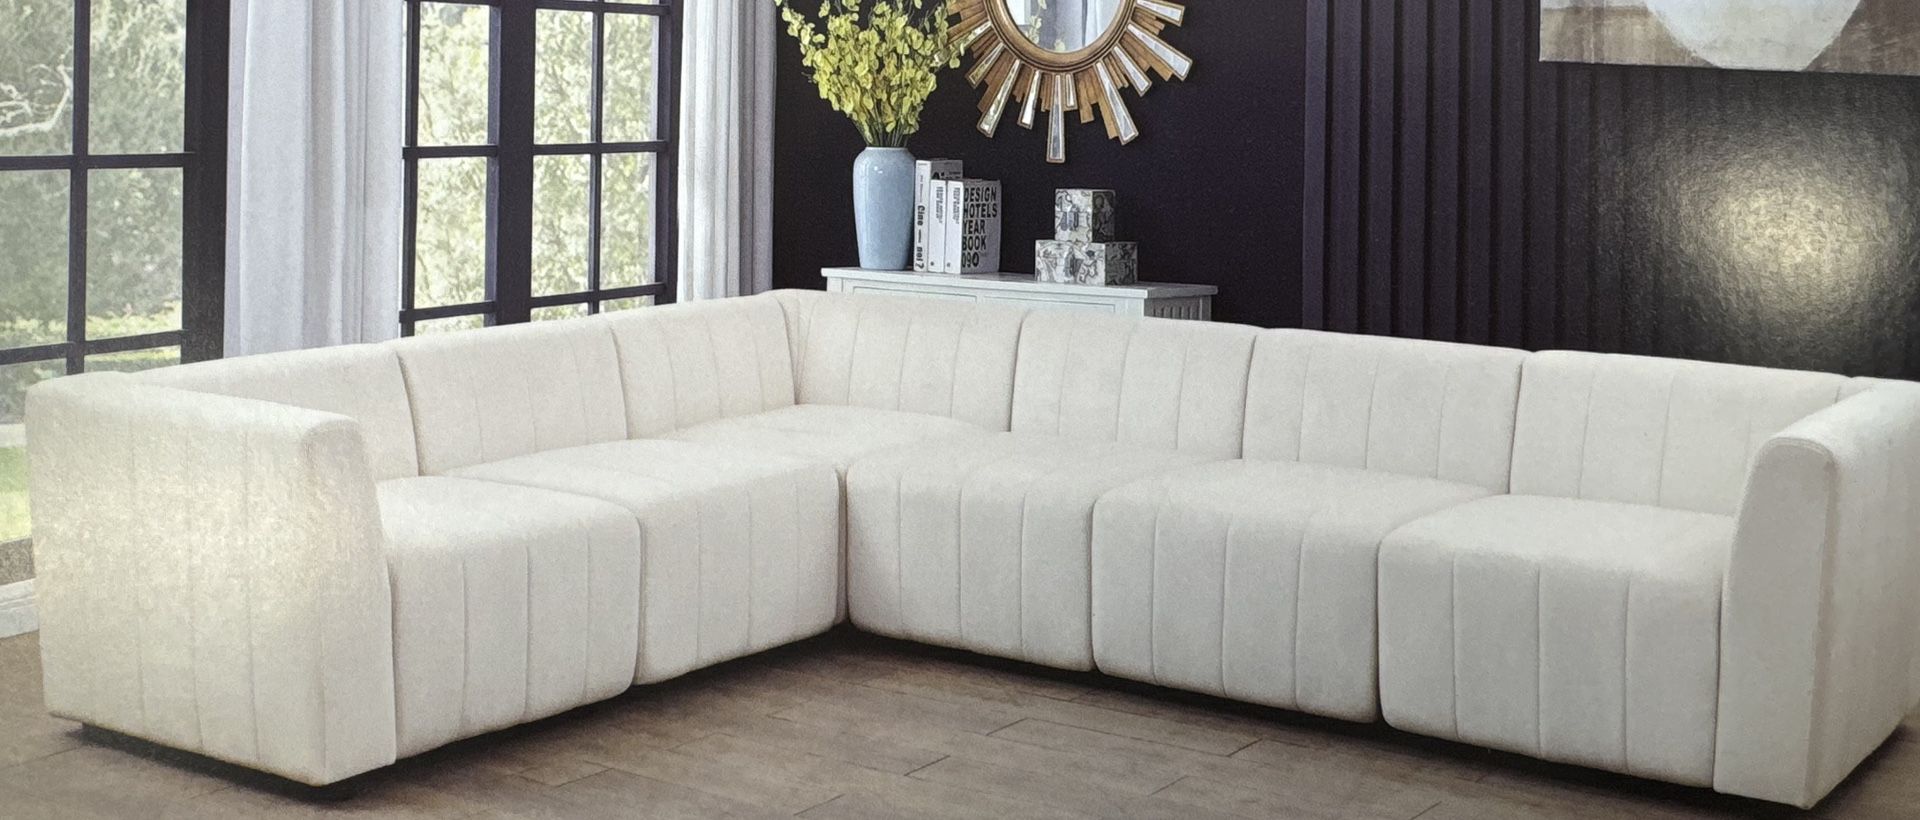 White Microfiber Wrap Around Sectional Couch